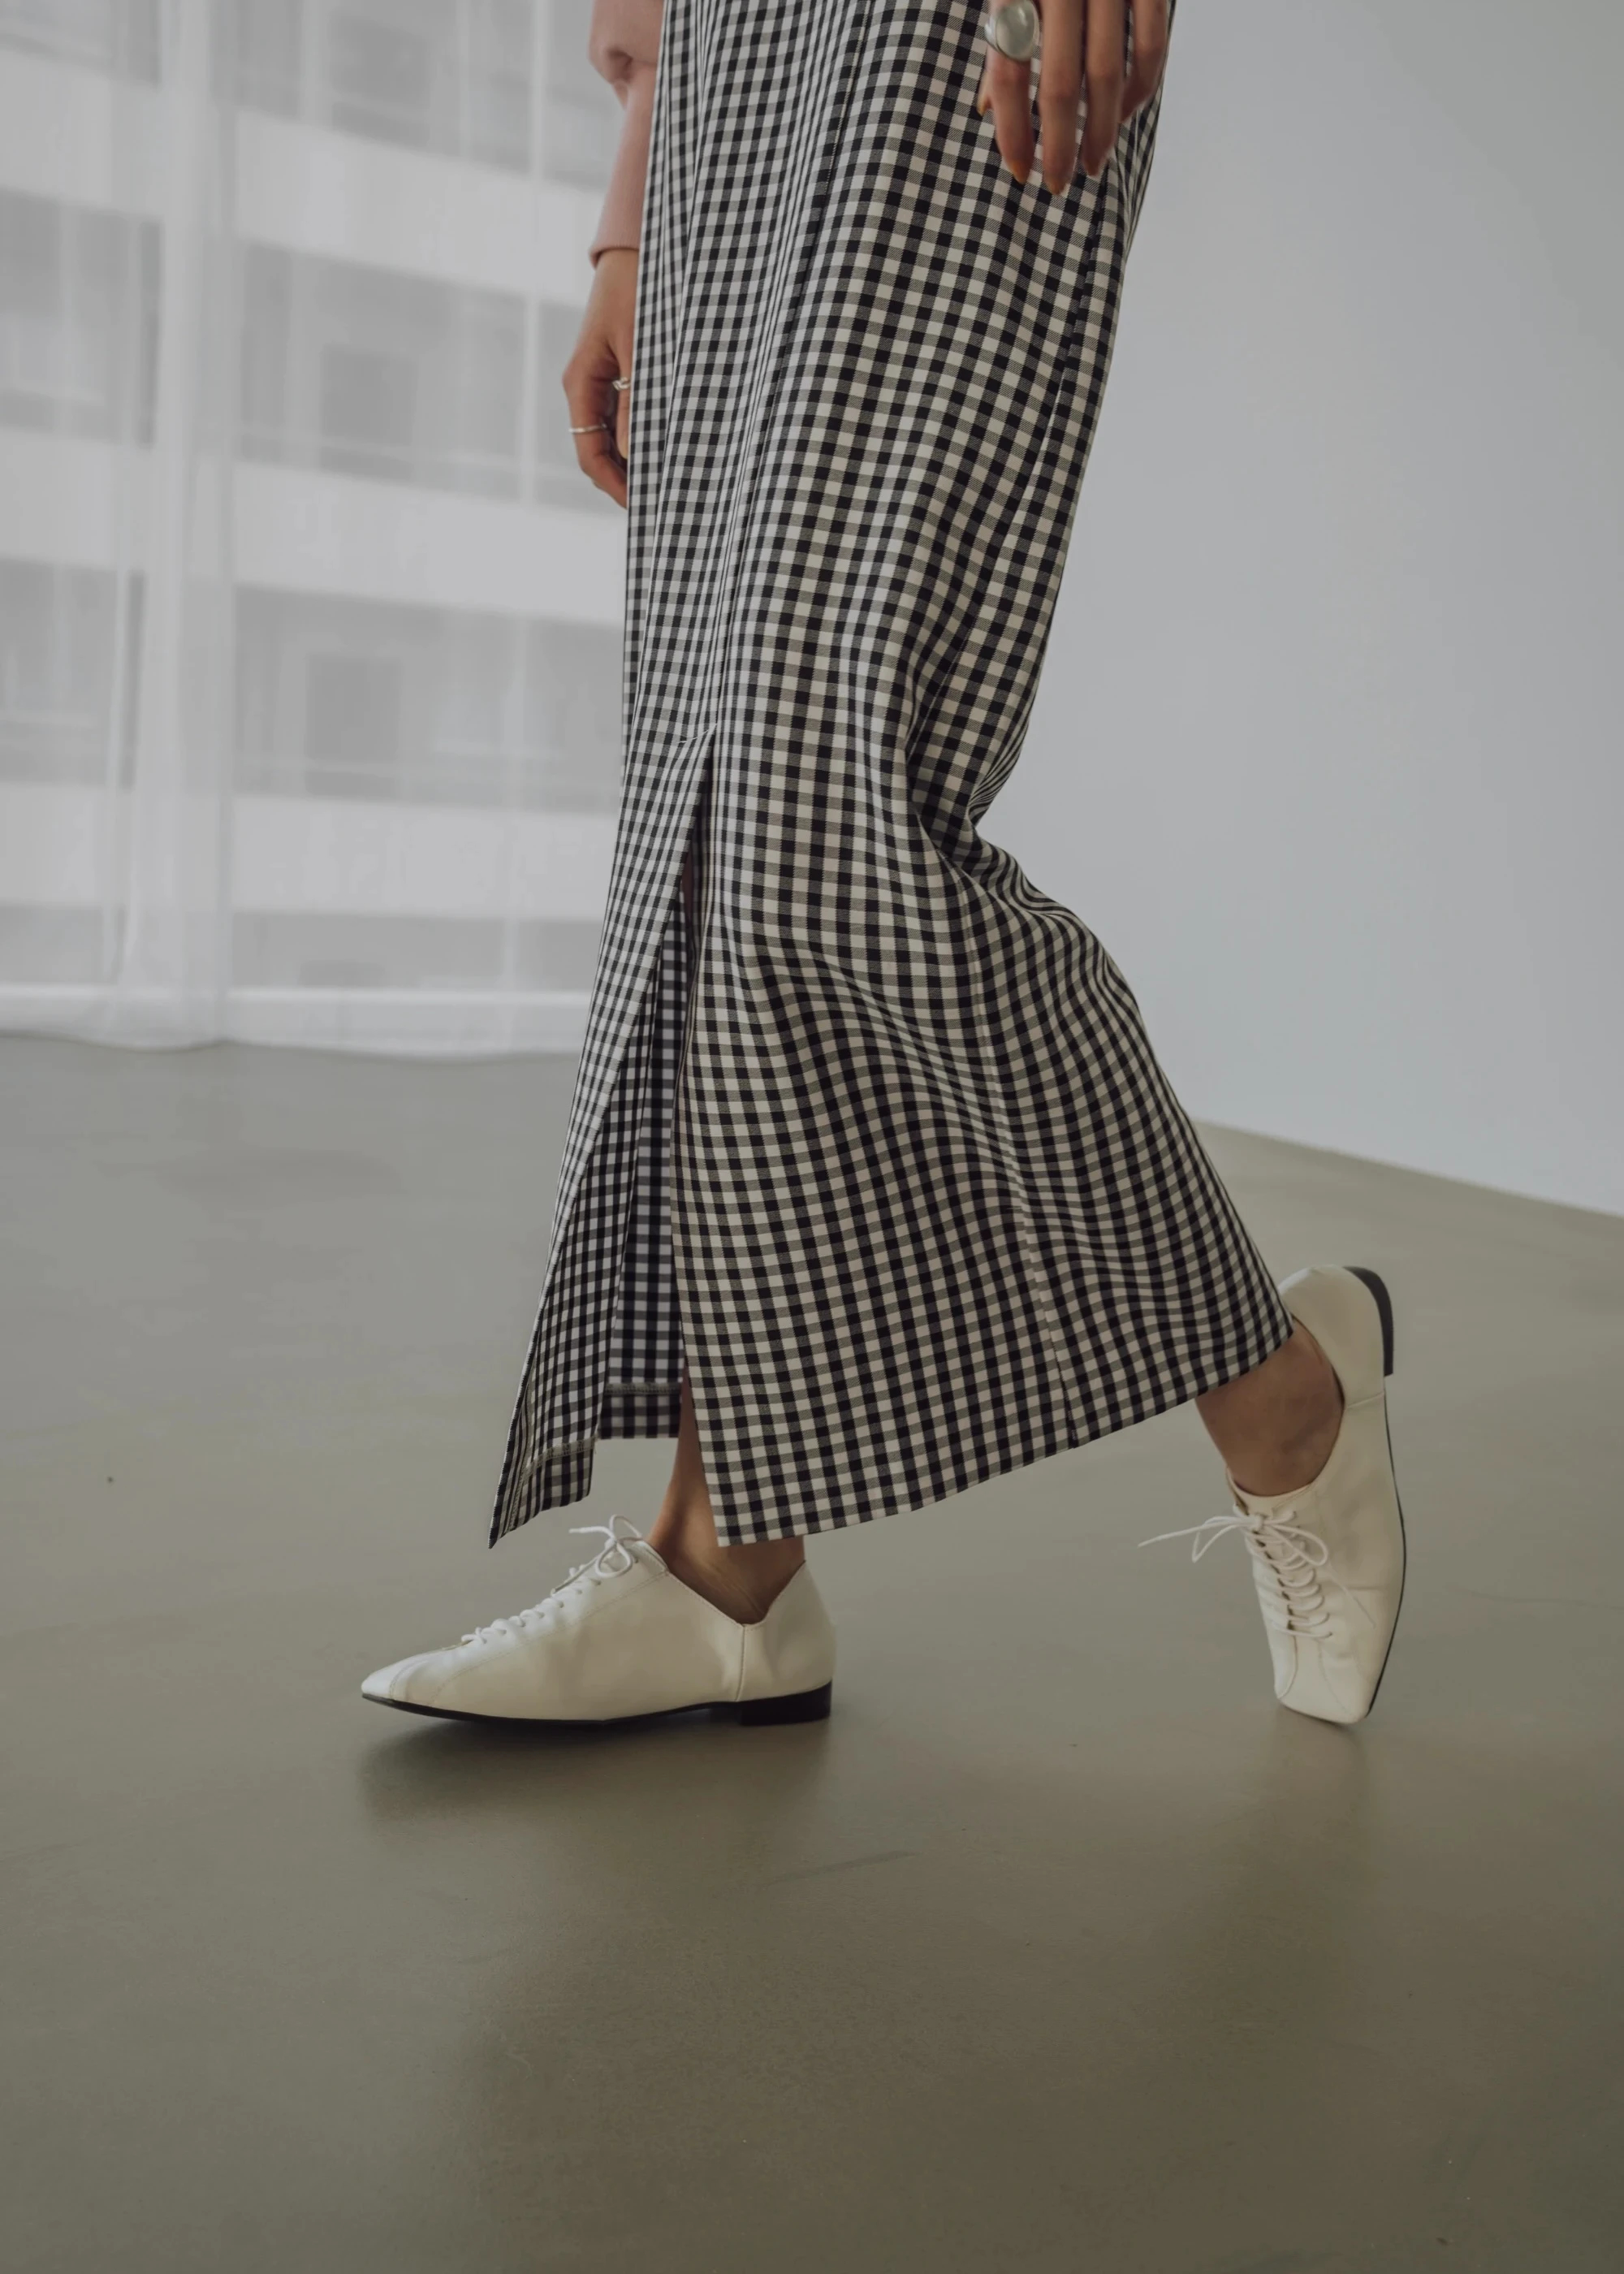 willfully 新品　tiered gingham check SK